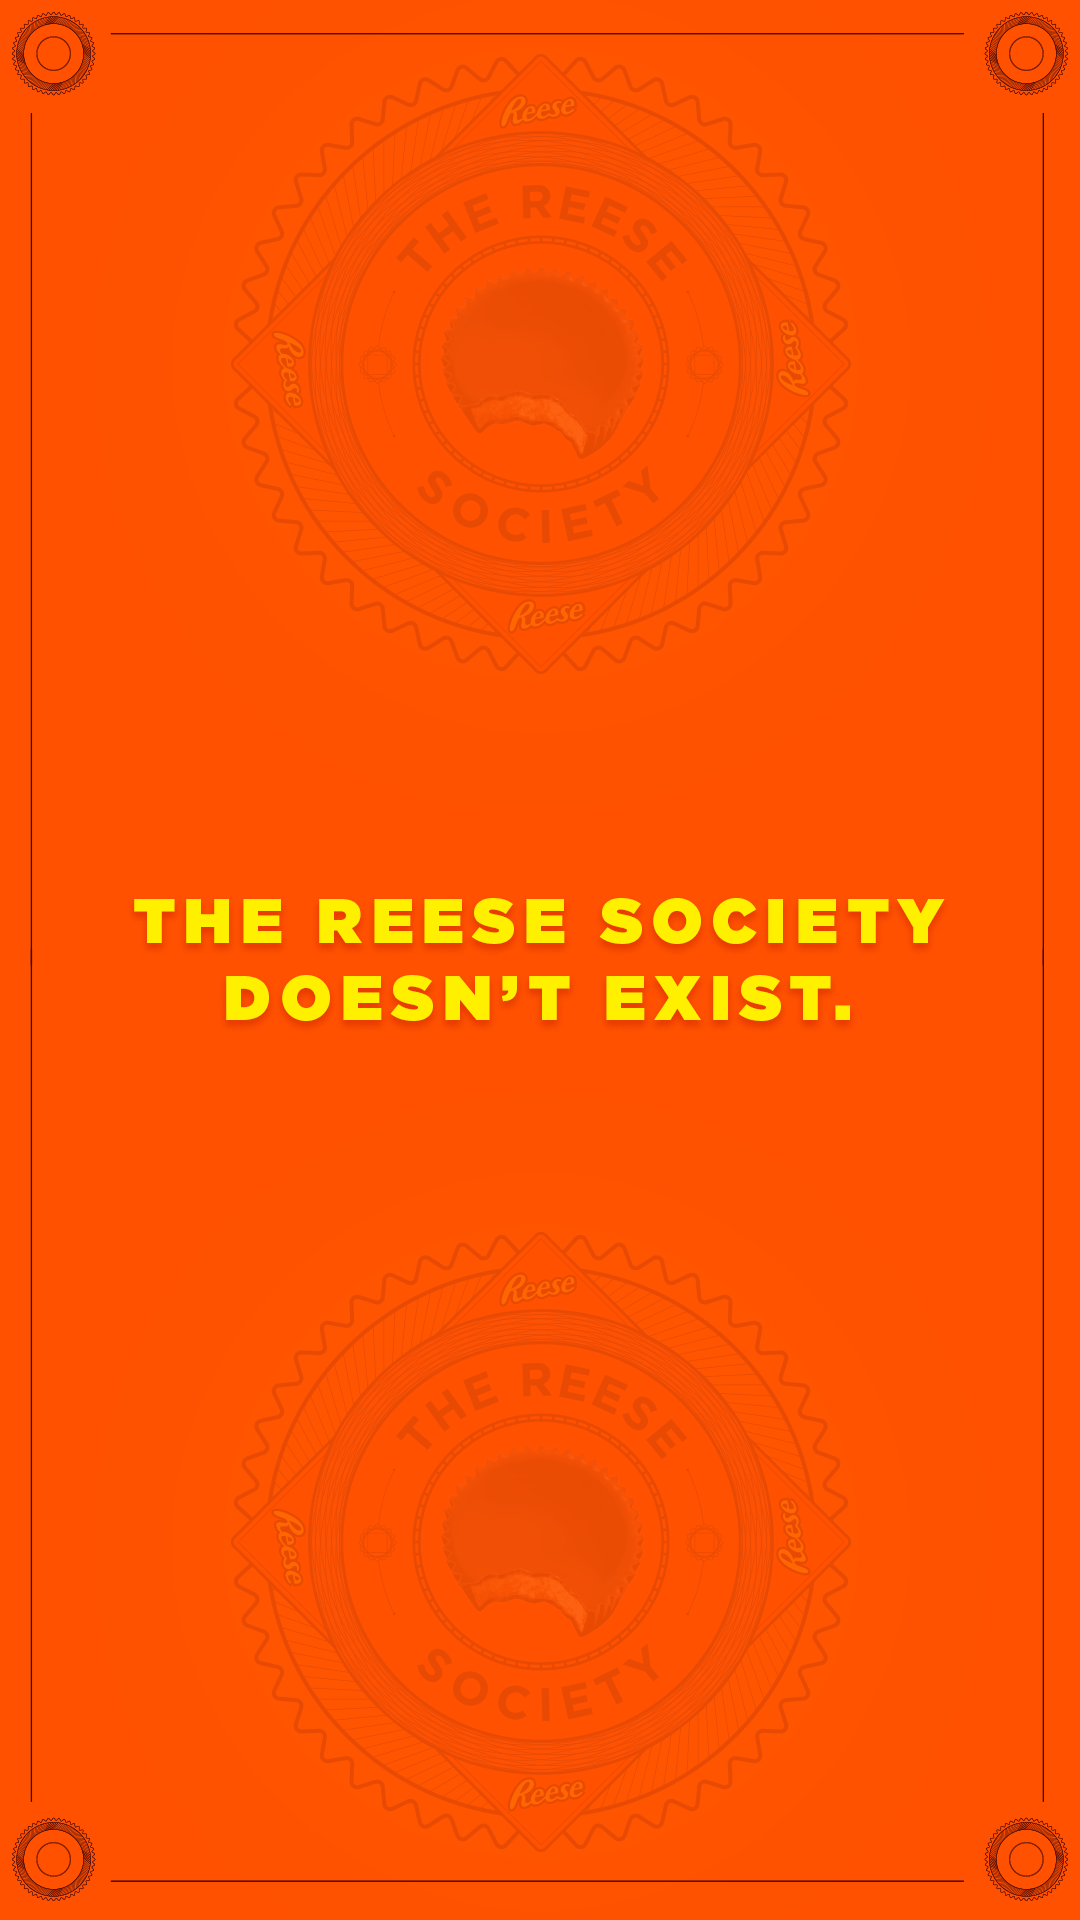 Reese-Society-IG_0091_The-Reese-Society-doesn’t-exist.png